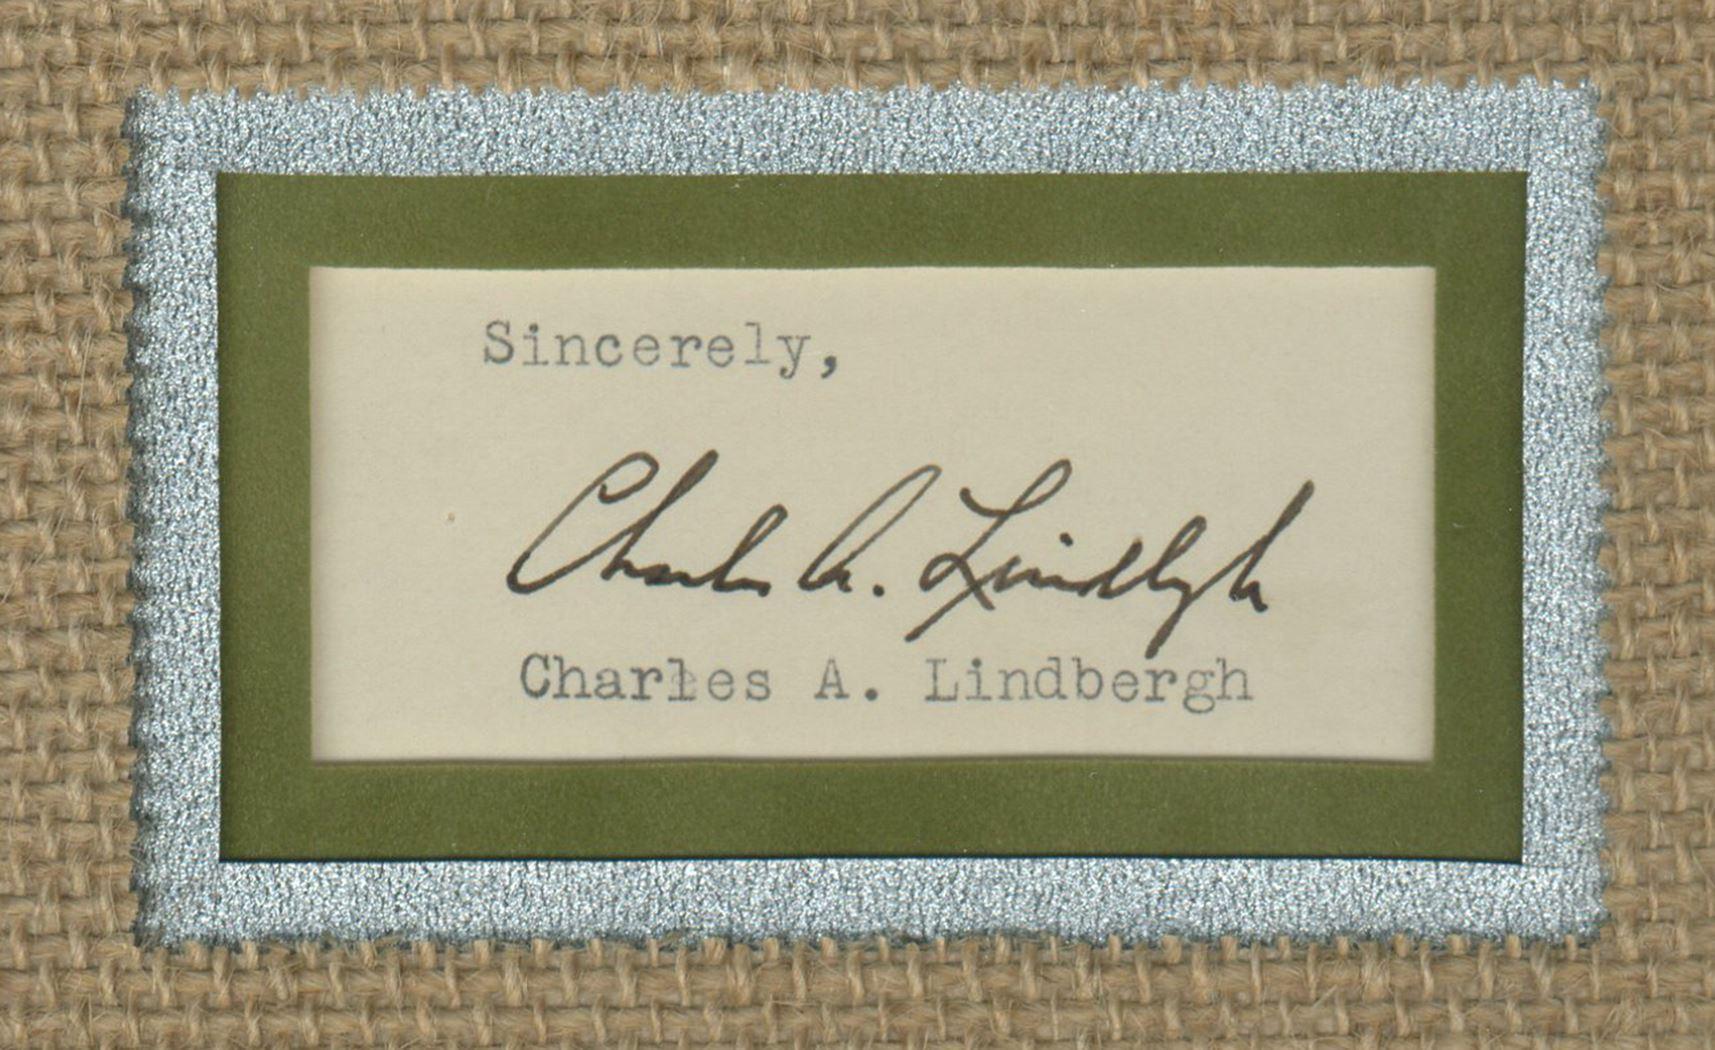 This is a handsome display featuring the signature of celebrated American aviator Charles A. Lindbergh (1902-1974). Lindbergh signed the page, now cut, in black ink as 